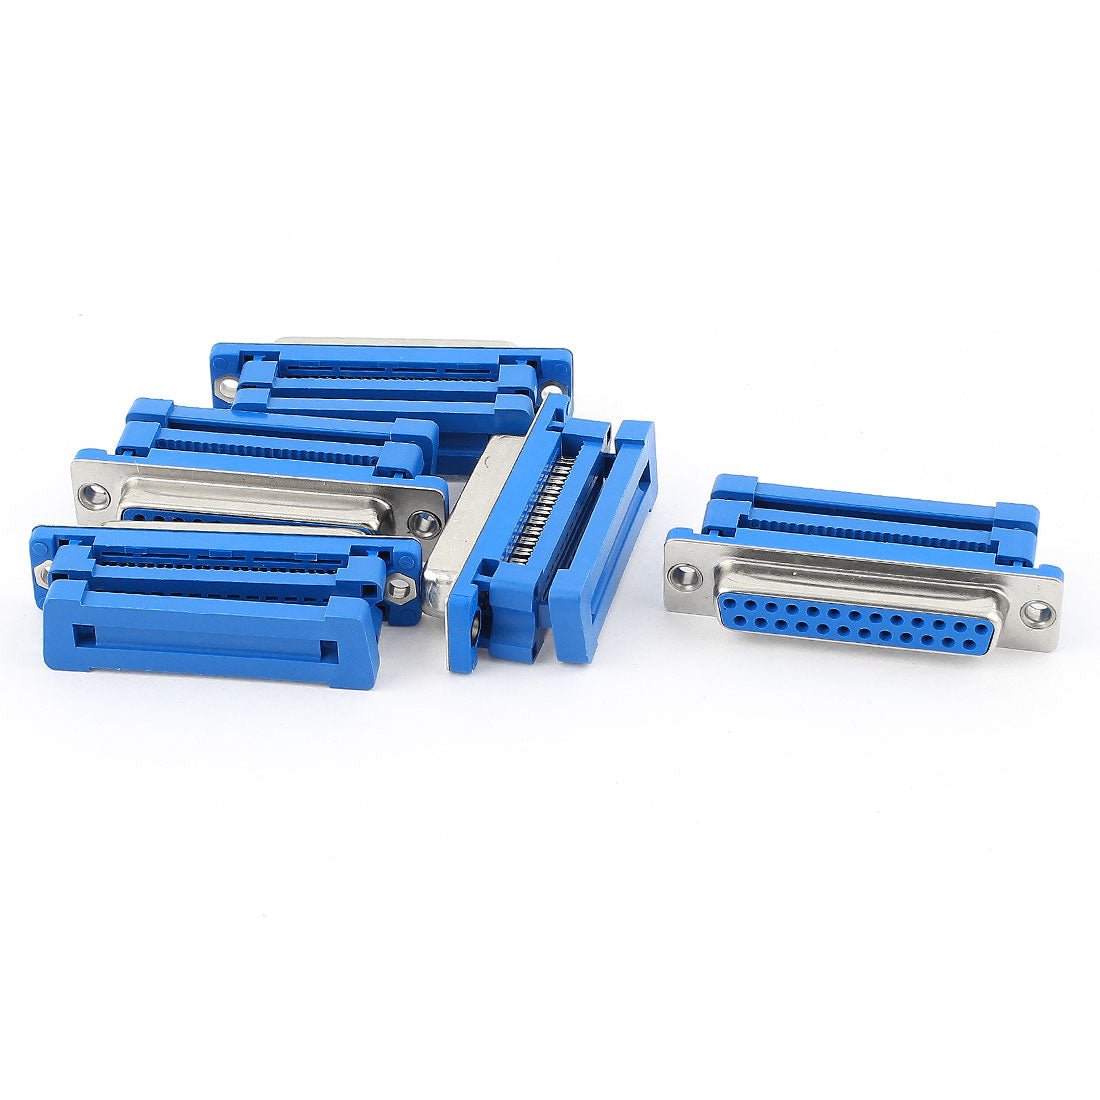 uxcell Uxcell 5 Pcs Parallel Port DB25 25-Pin Female IDC Connector Flat Cable Adapter